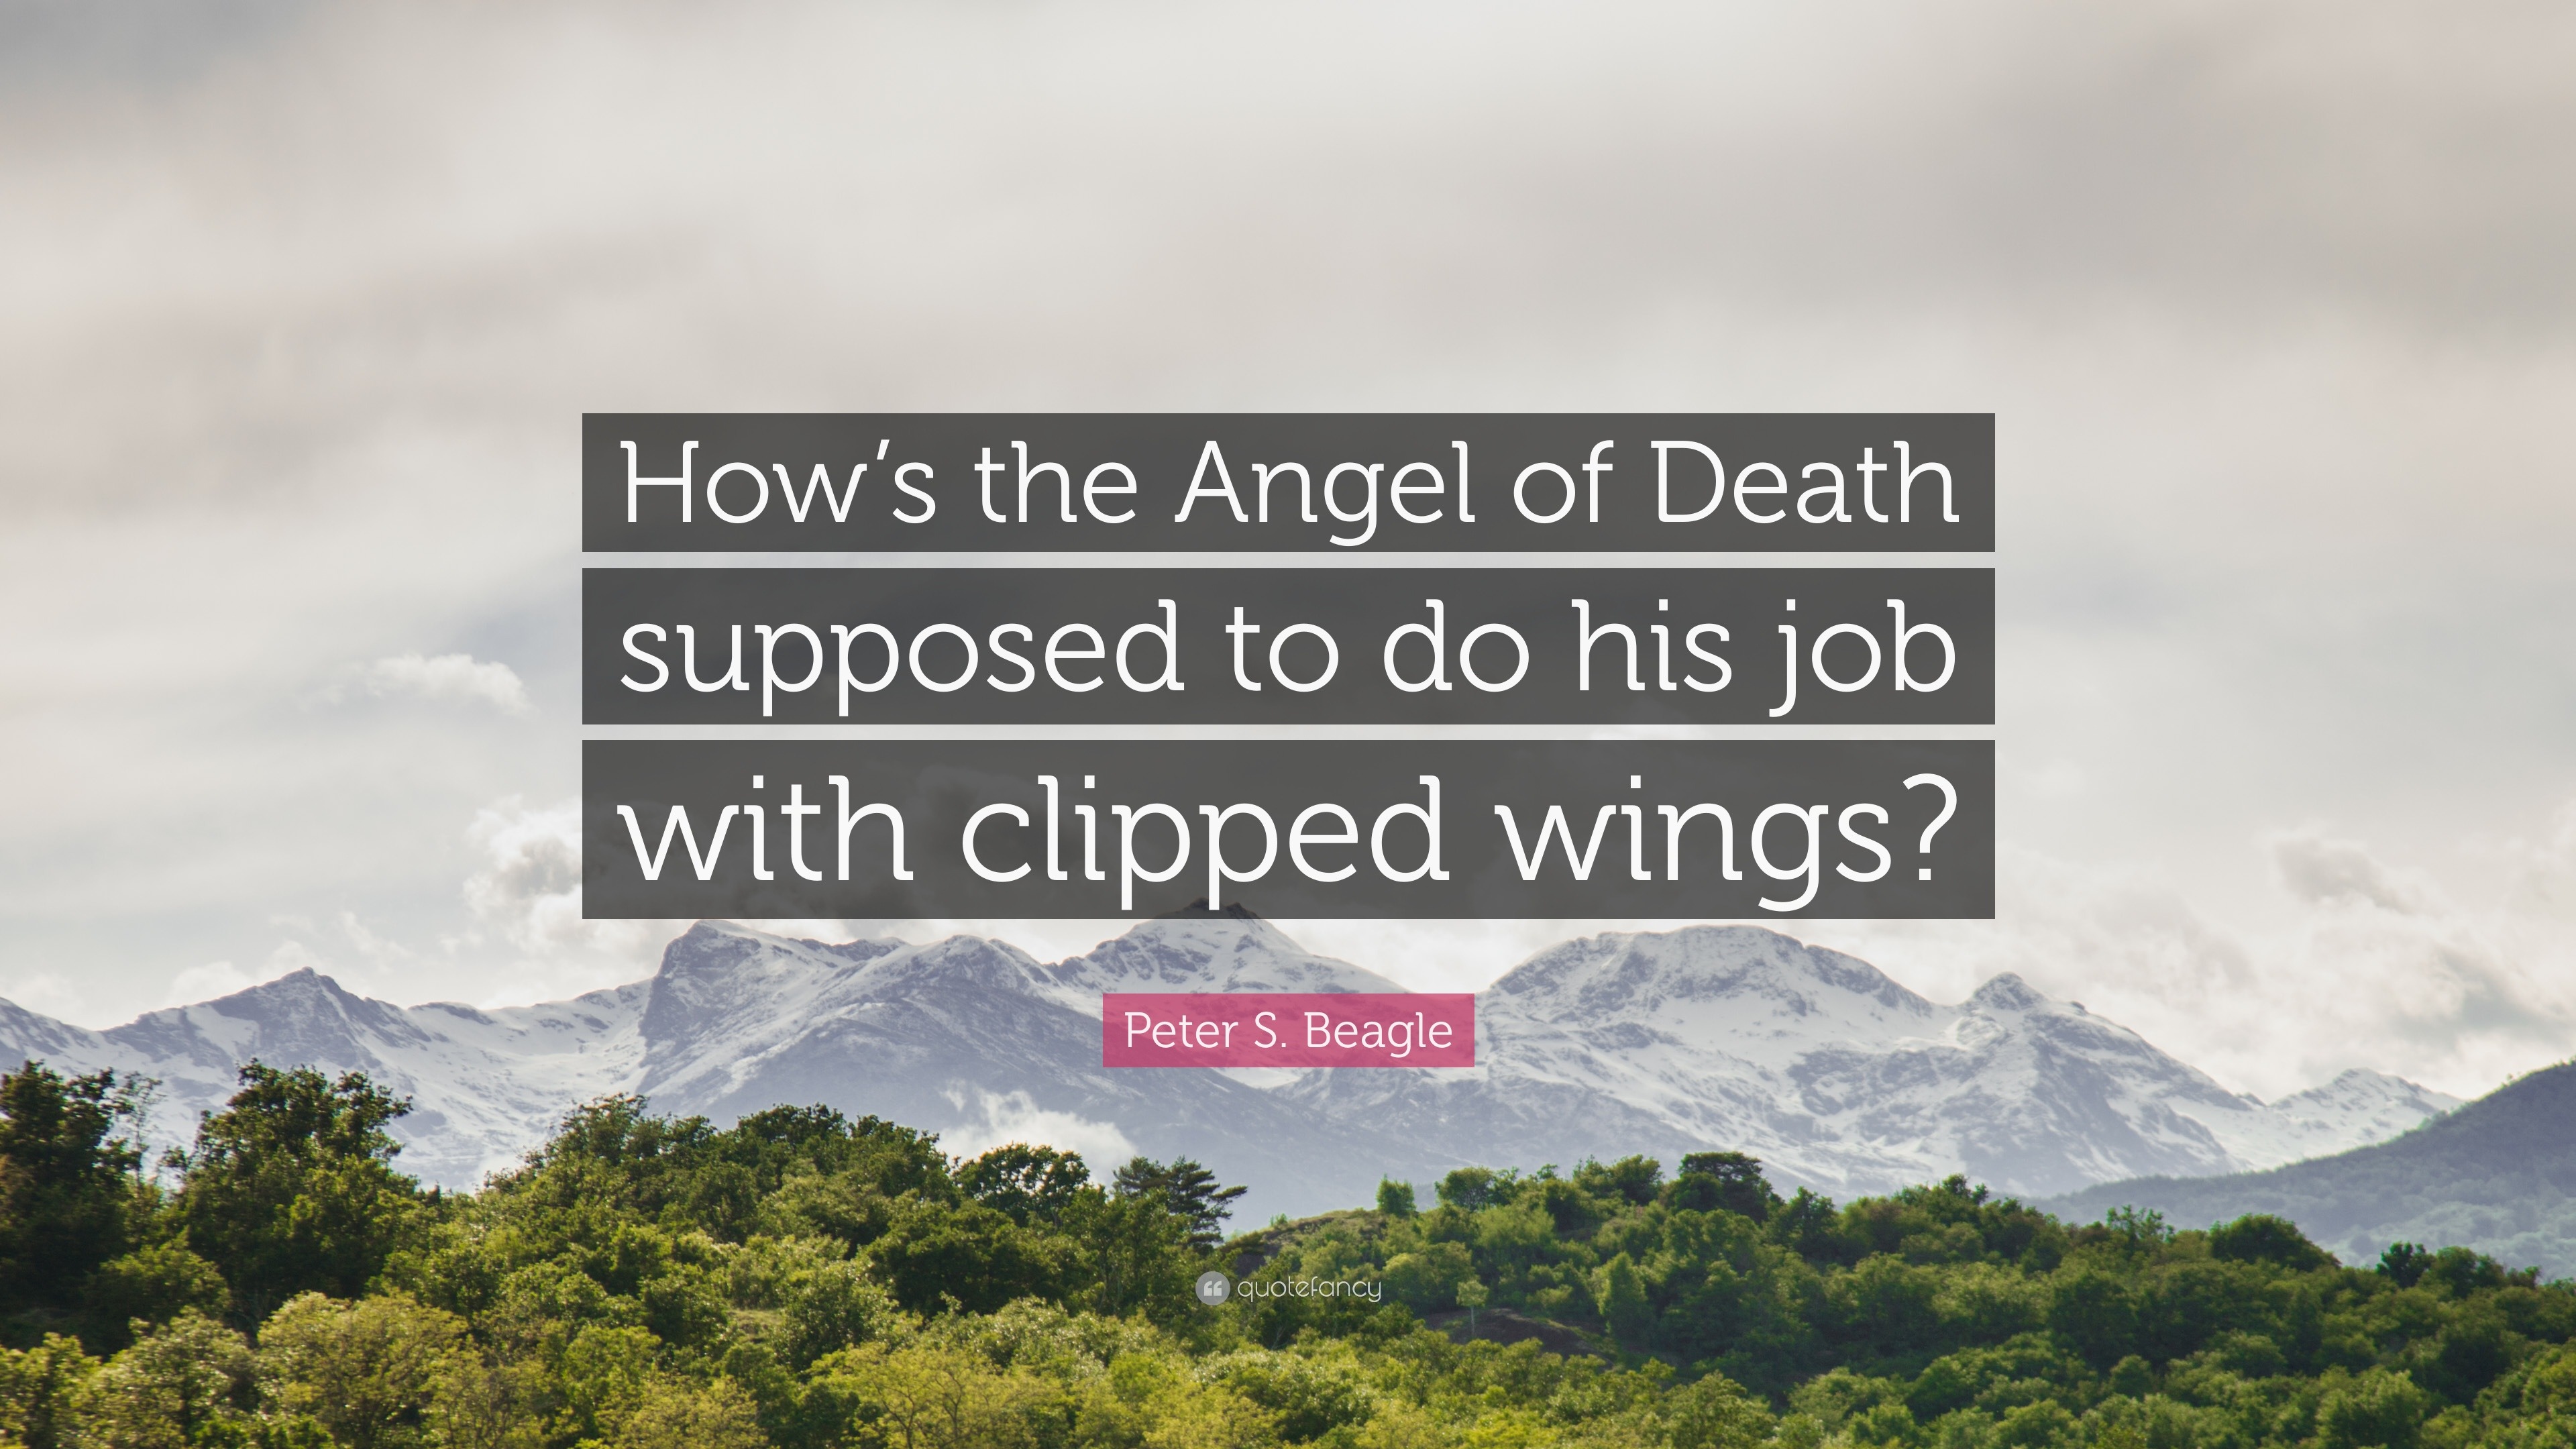 The Angel of Death Has One Job, and He Does It Well